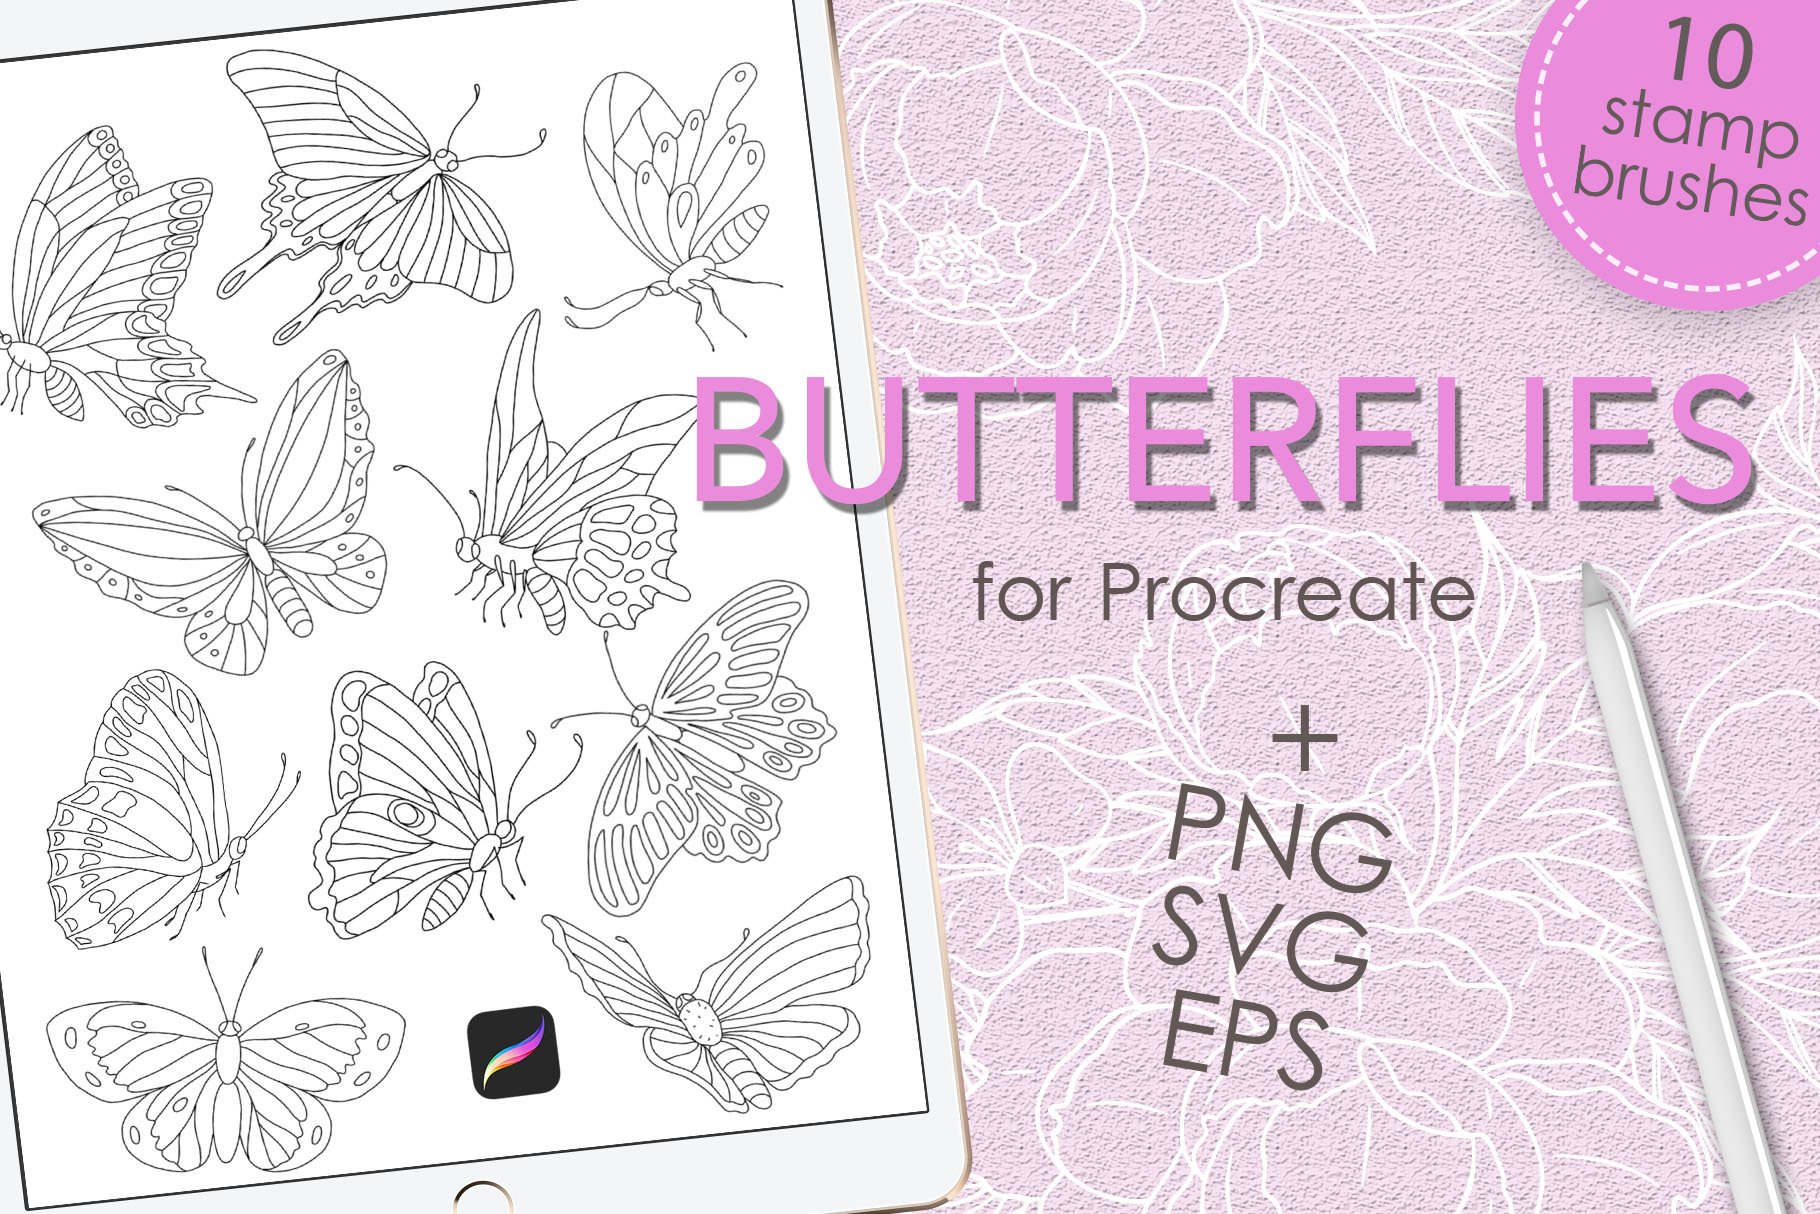 Butterflies brushes for Procreatecover image.